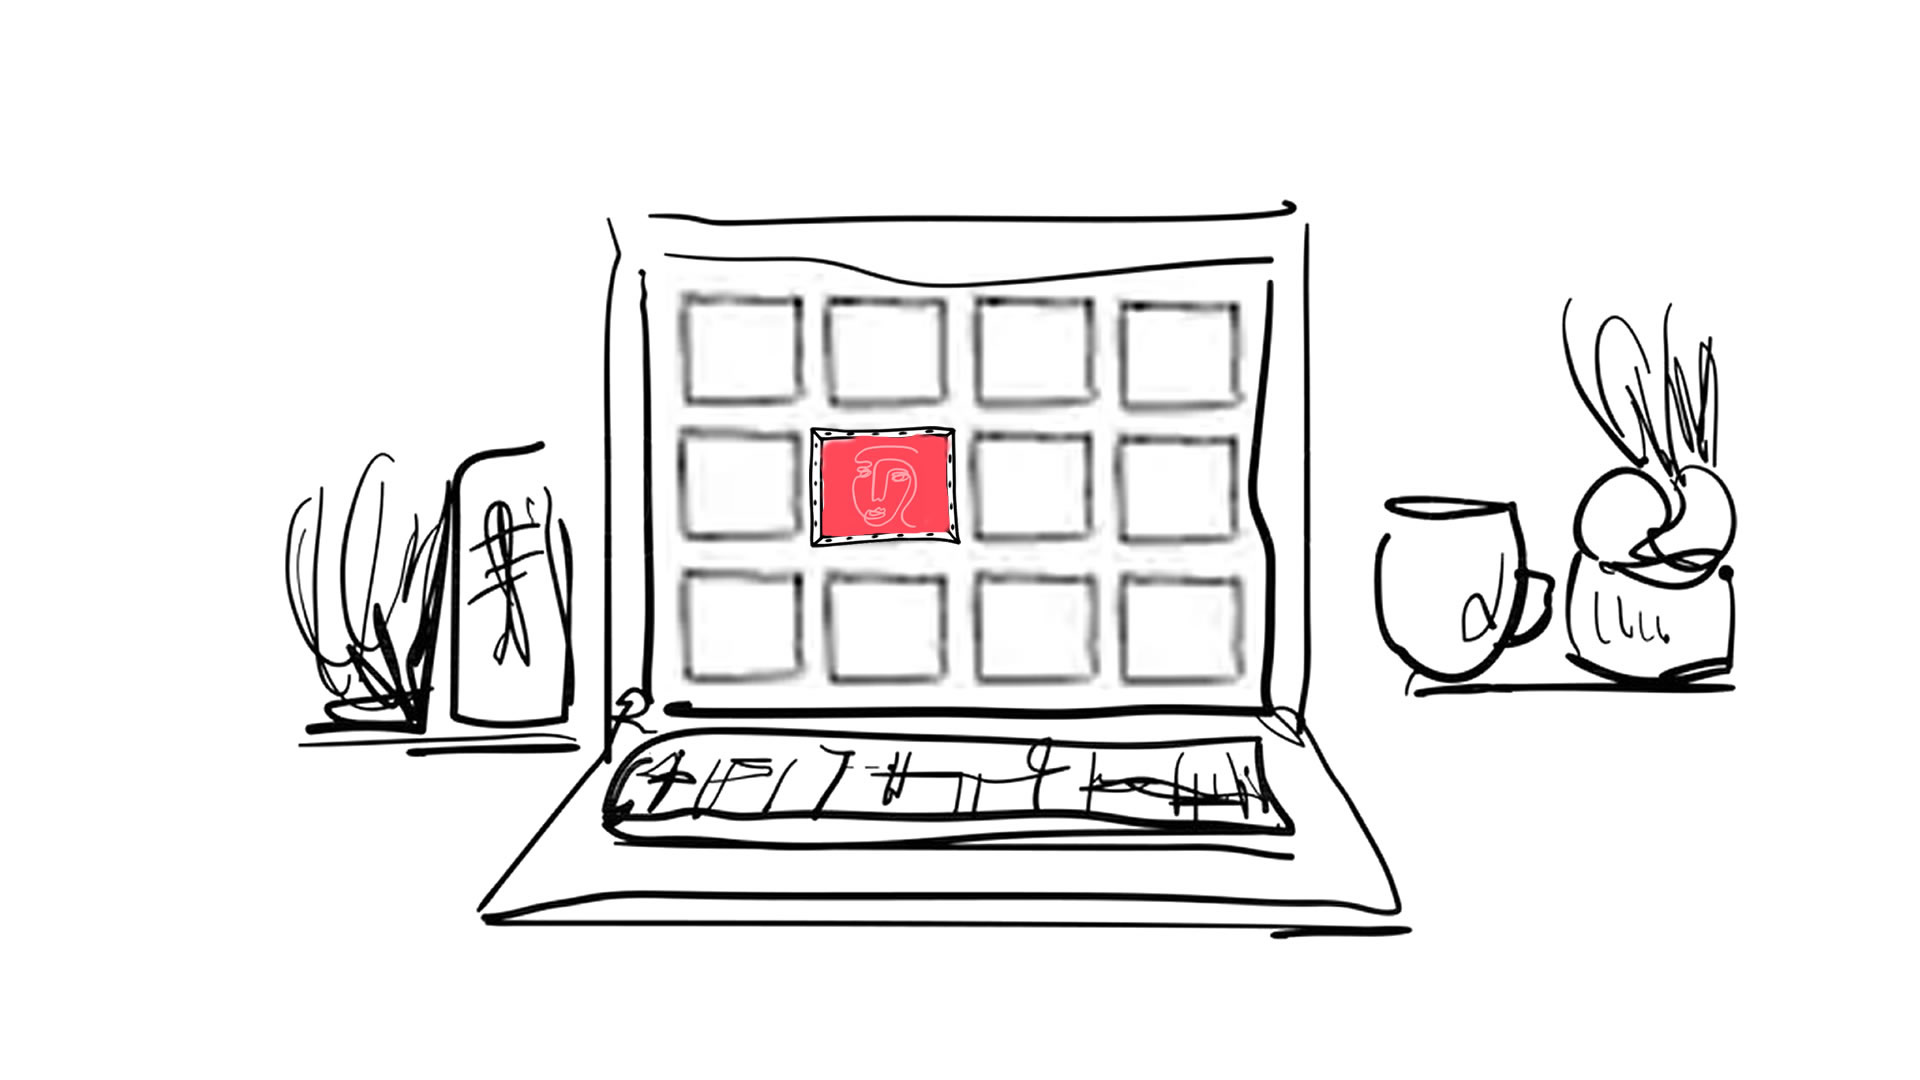 A drawing of a computer